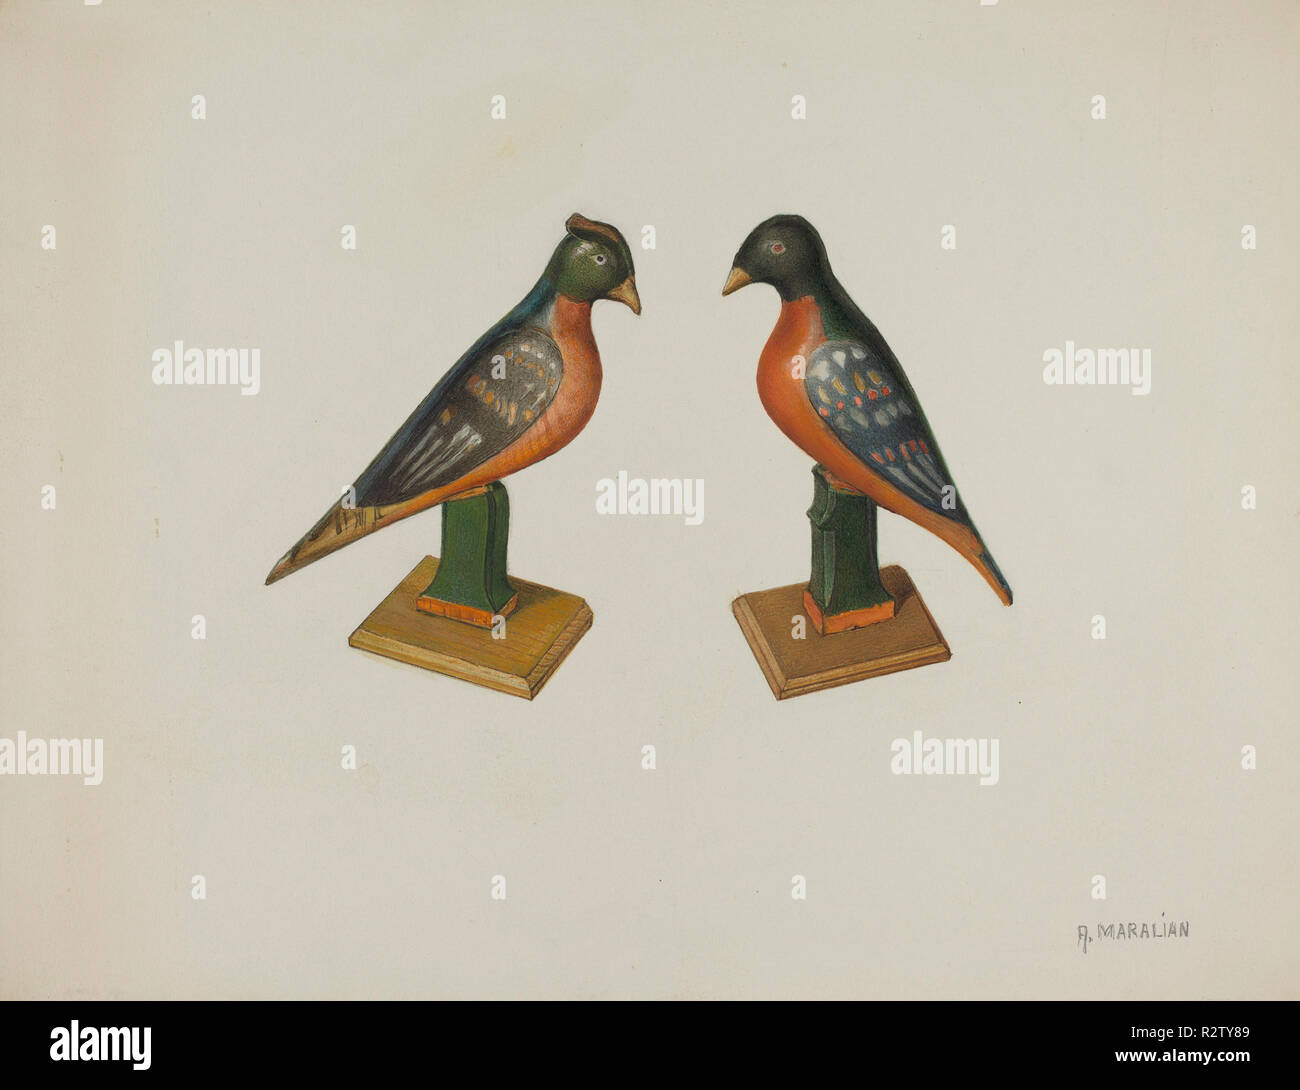 Pa. German Toy Birds. Dated: c. 1939. Dimensions: overall: 23.2 x 30.1 cm (9 1/8 x 11 7/8 in.)  Original IAD Object: 3 5/8' high. Medium: watercolor, graphite, and gouache on paperboard. Museum: National Gallery of Art, Washington DC. Author: Arsen Maralian. Stock Photo